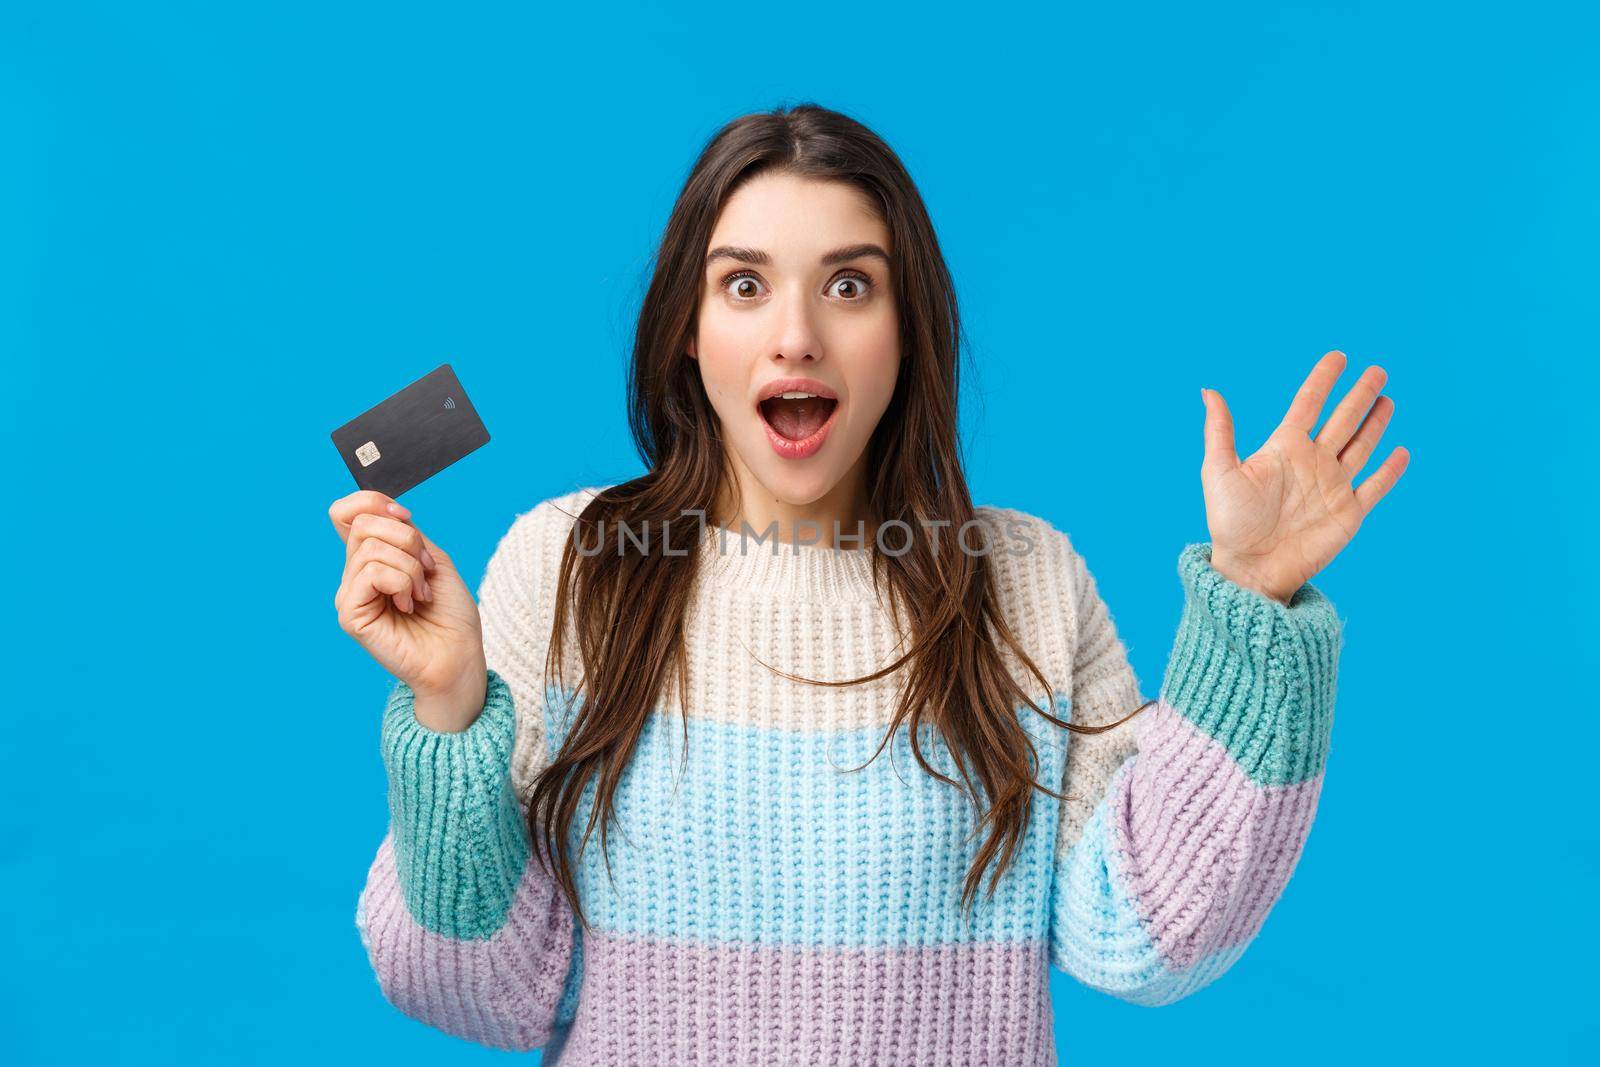 Girl telling about awesome news, explaining something passionetly and excited, gesturing holding credit card, cant express amazement and joy, seeing something breathtaking, say take my money.